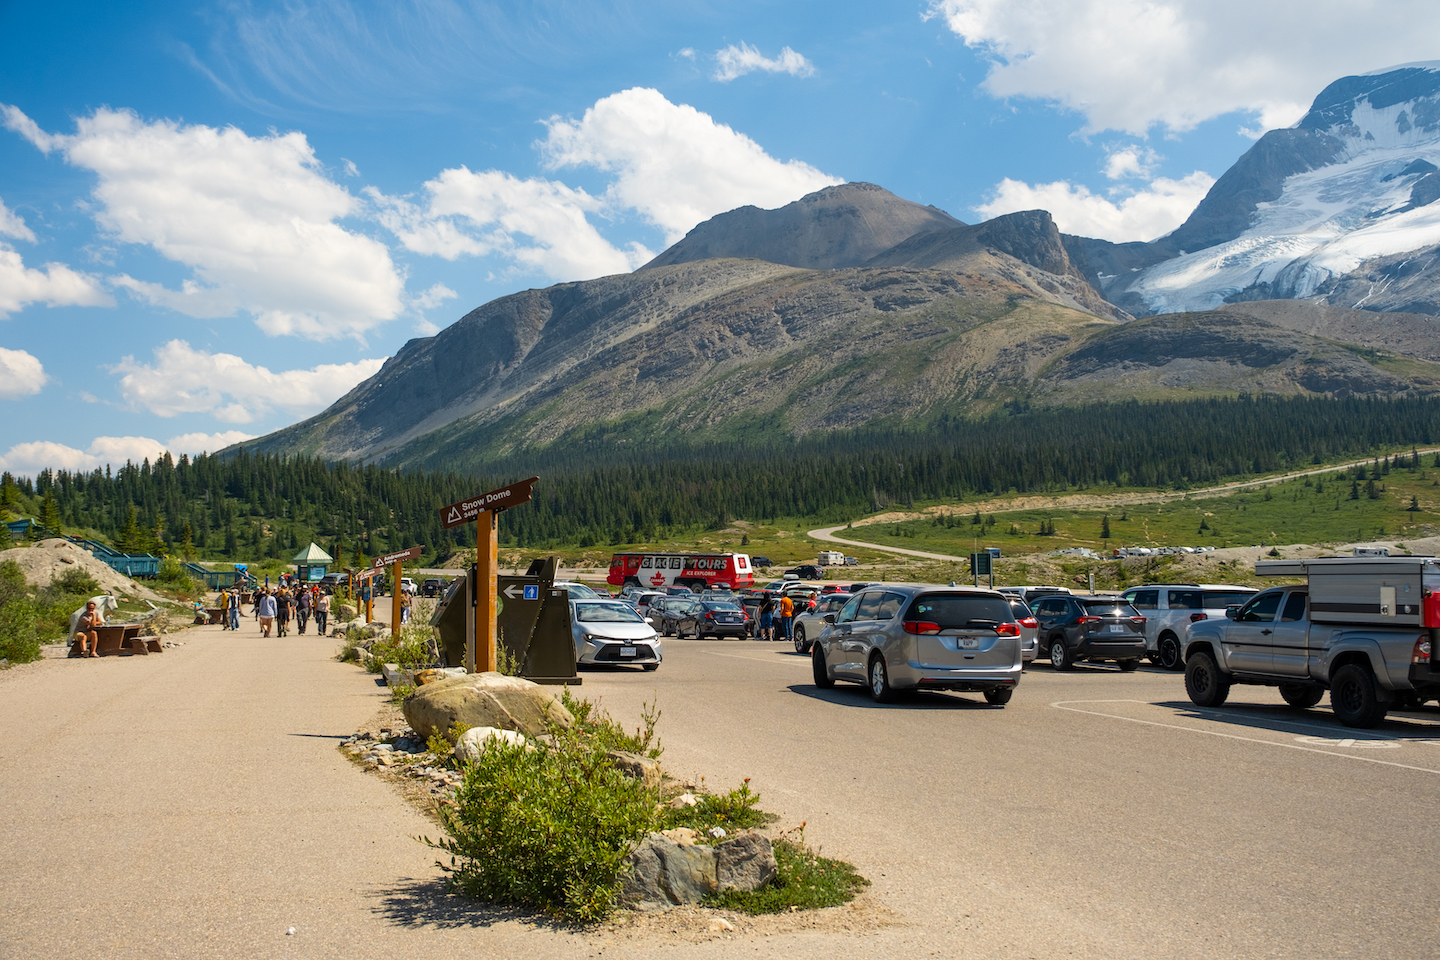 Parking at the Glacier Discovery Center